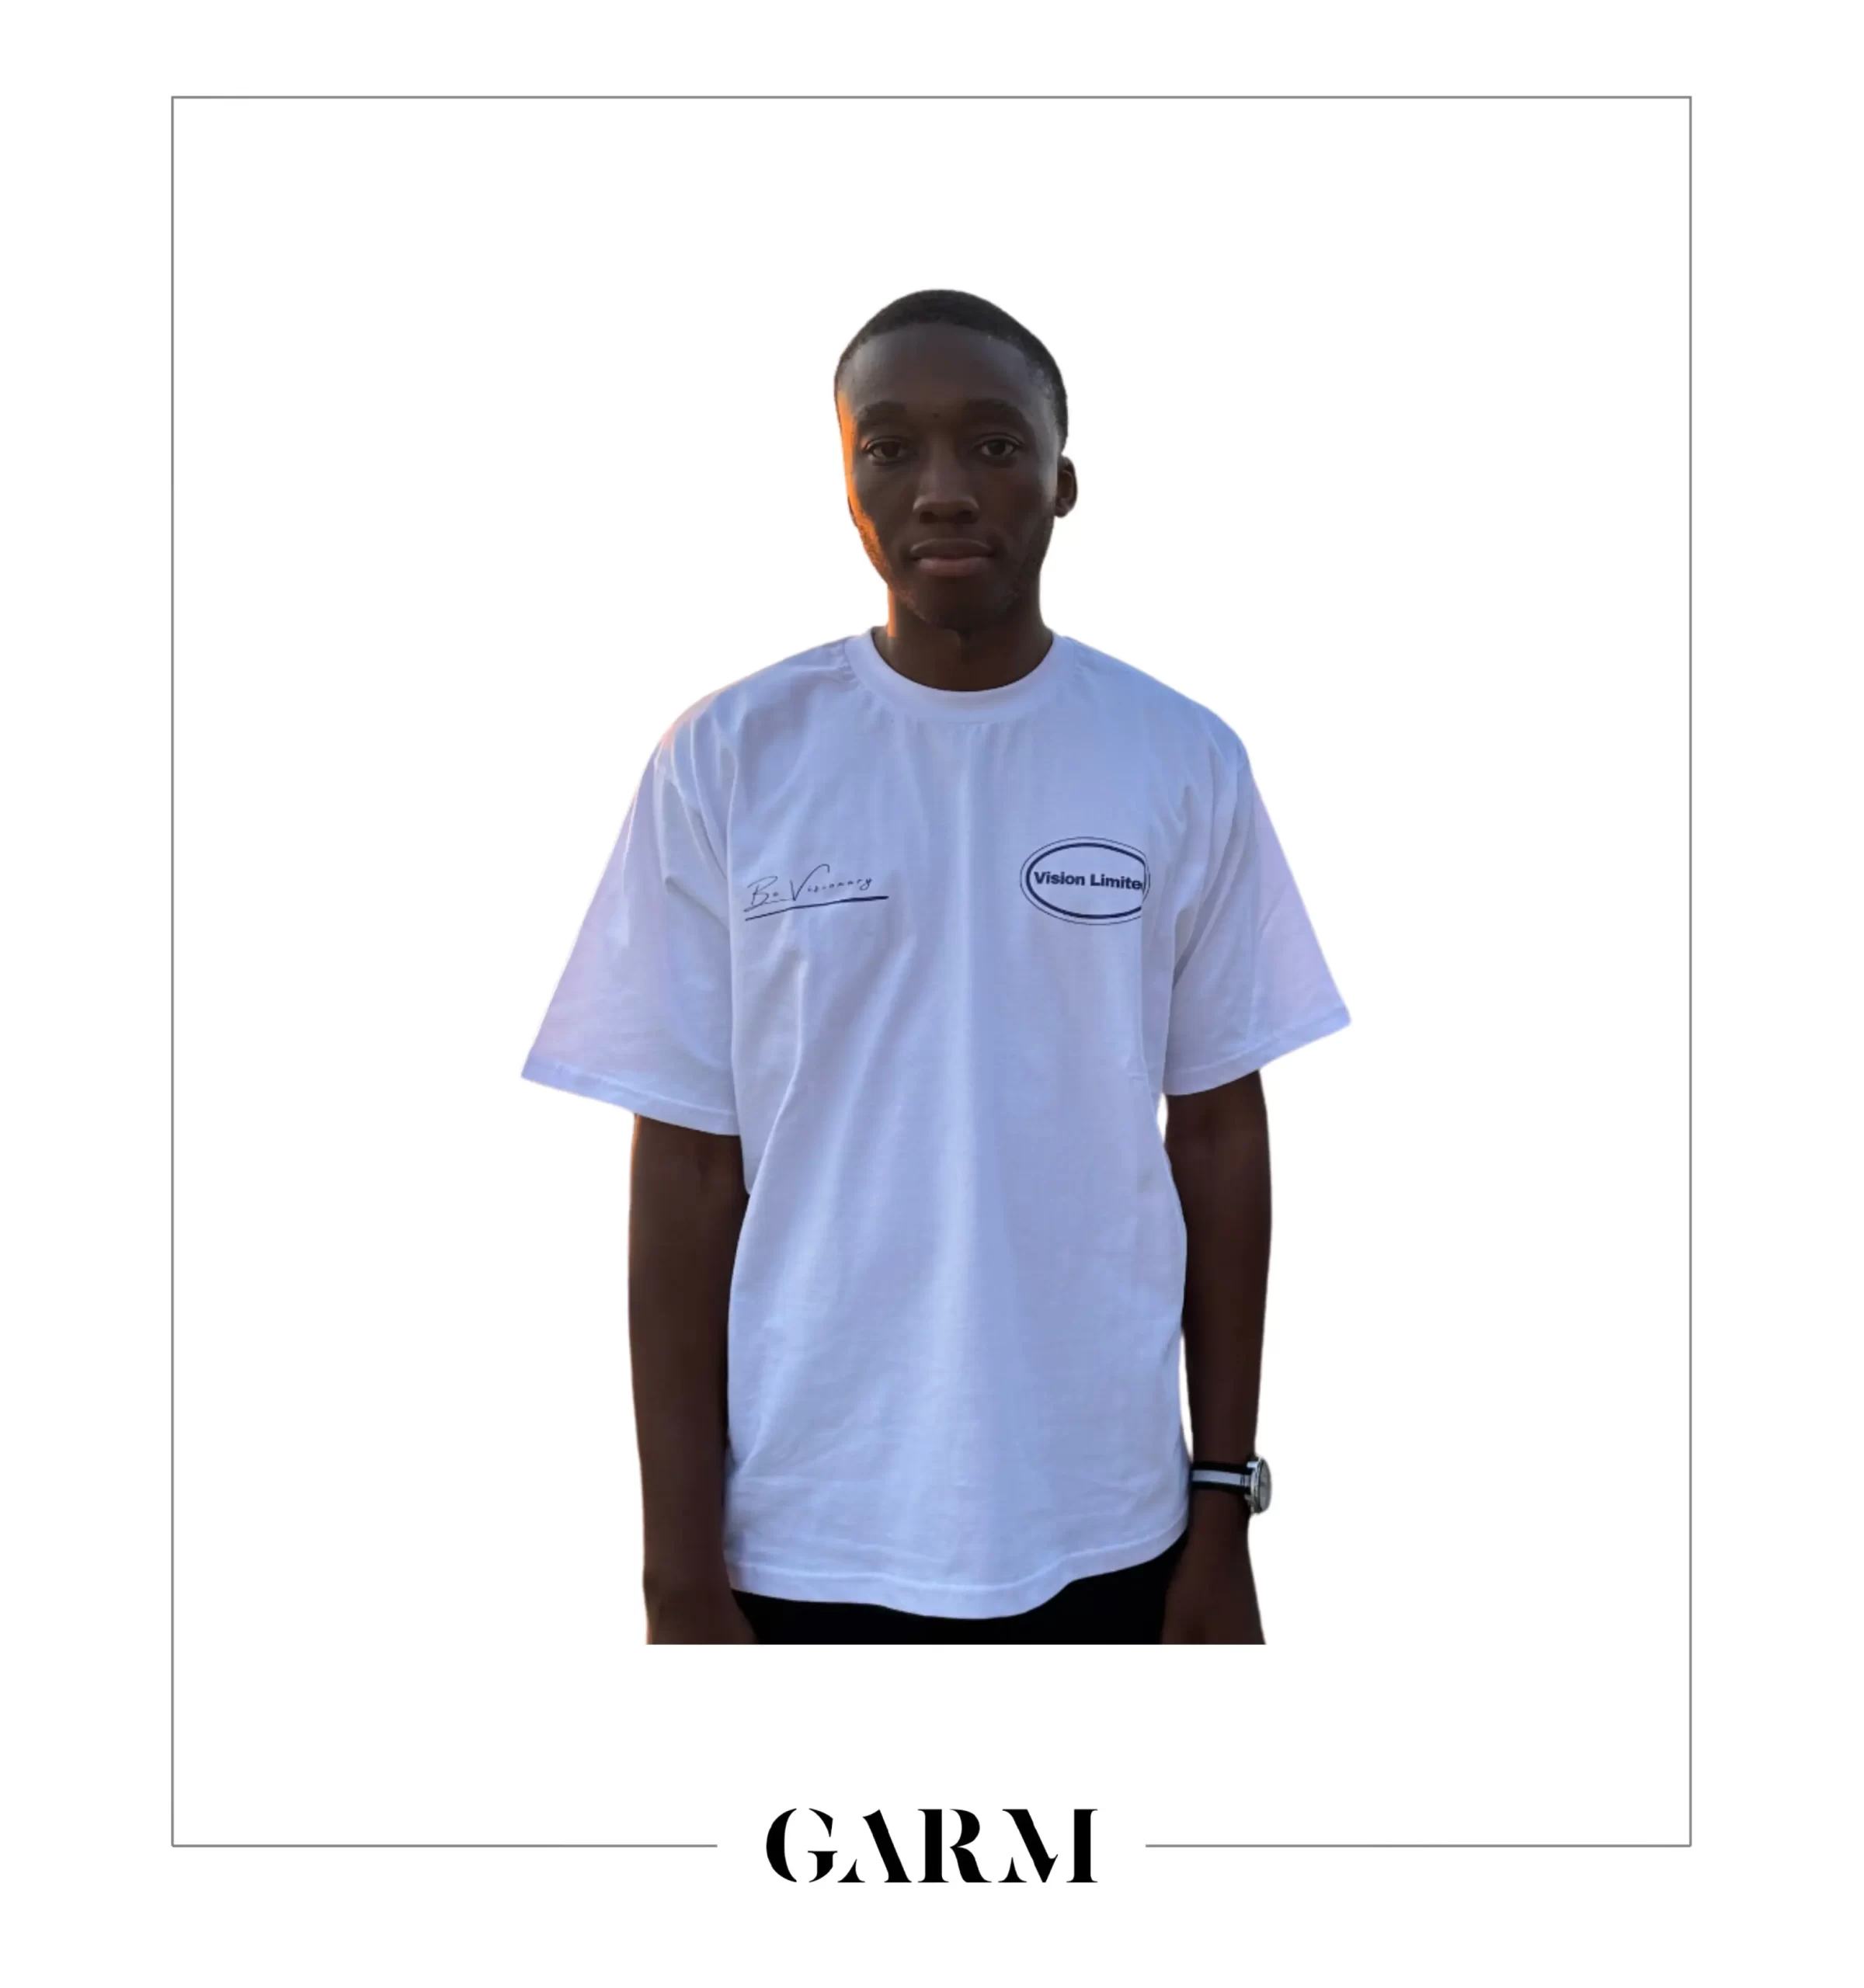 Vision Limited's Grandiose Collection White Tee available on Garm